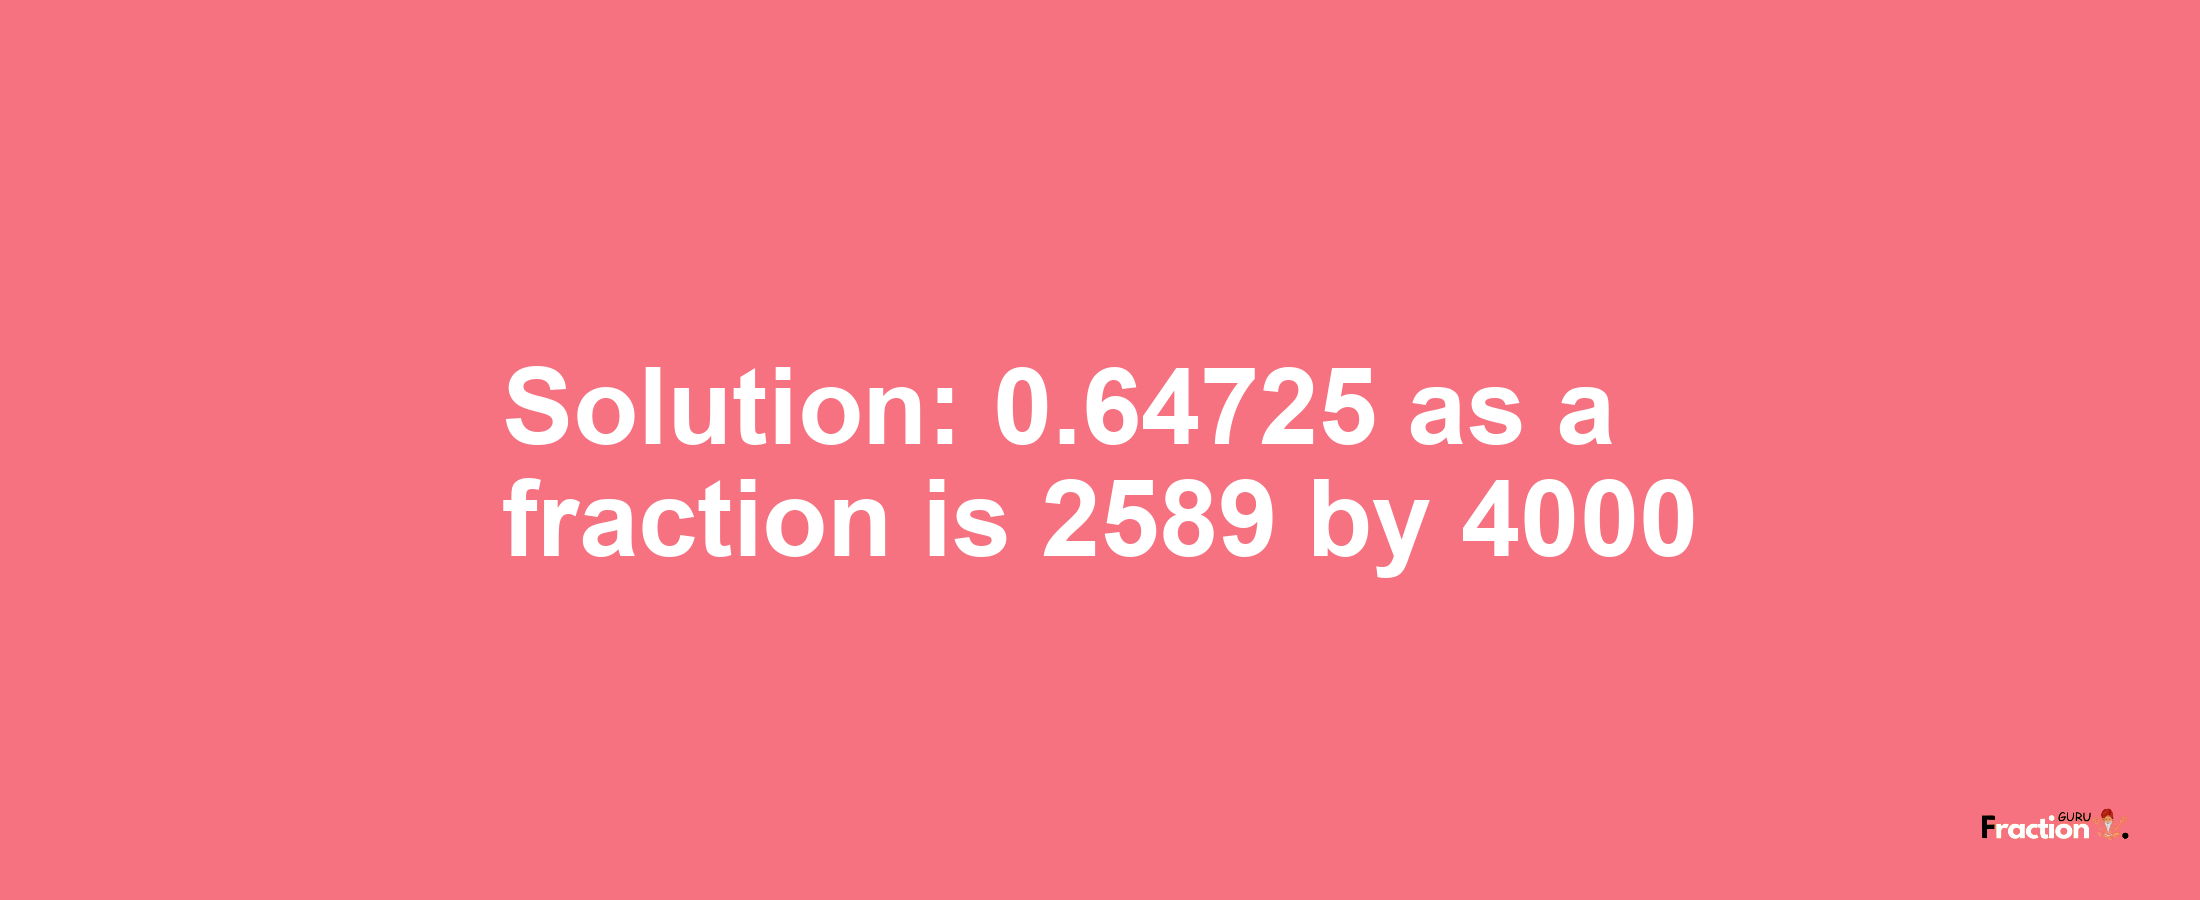 Solution:0.64725 as a fraction is 2589/4000